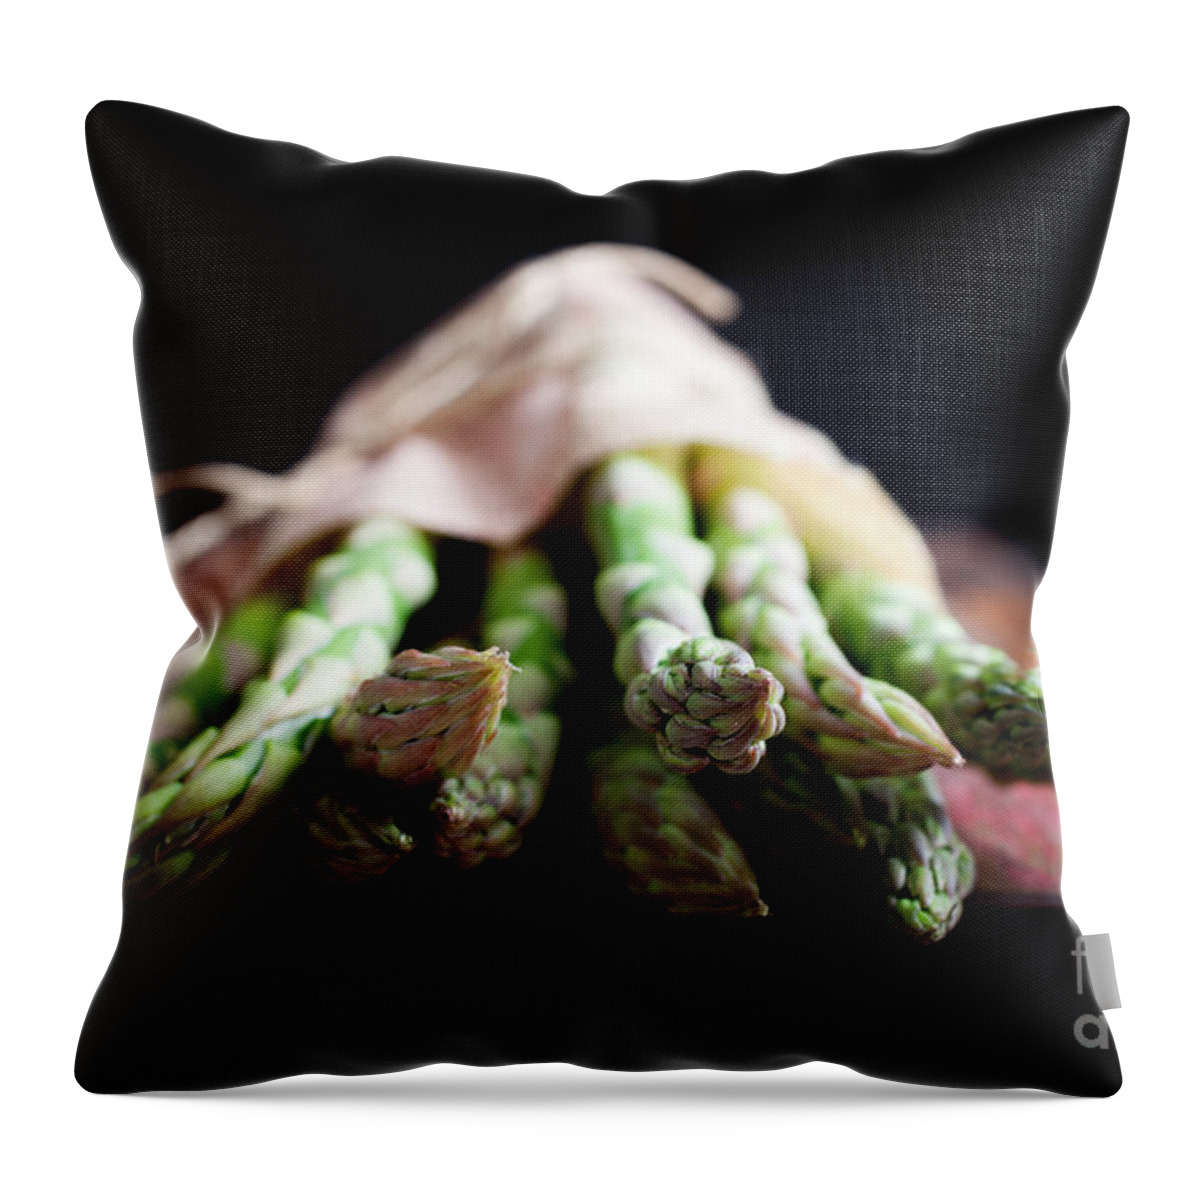 Asparagus Throw Pillow featuring the photograph Asparagus #2 by Kati Finell